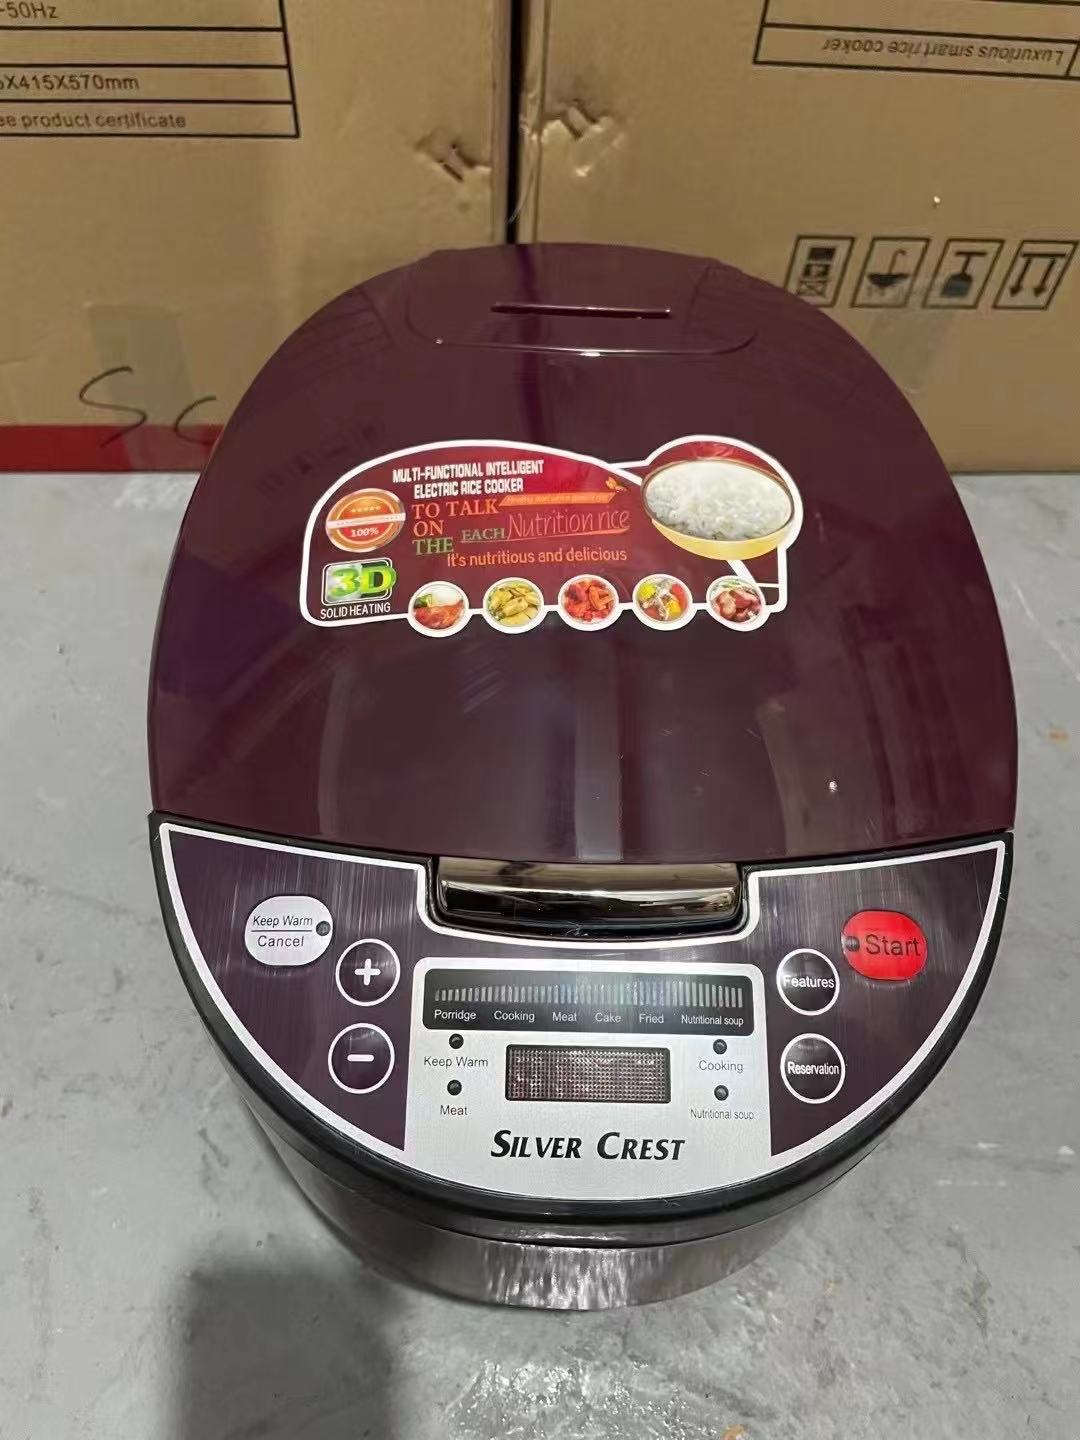 5L Large Capacity English Smart Rice Cooker